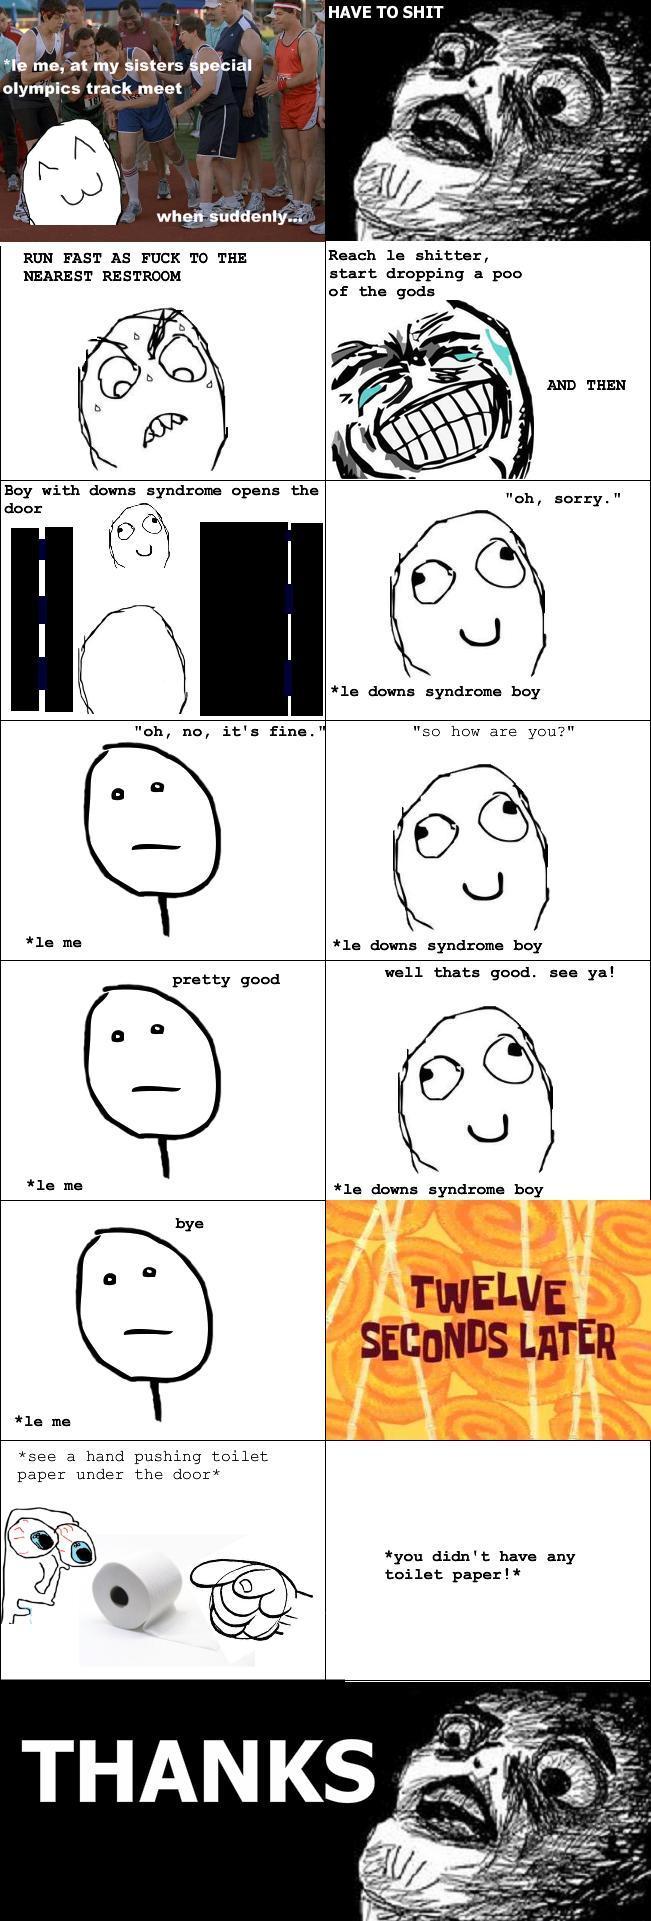 rage-comic-pooping-special-olympics